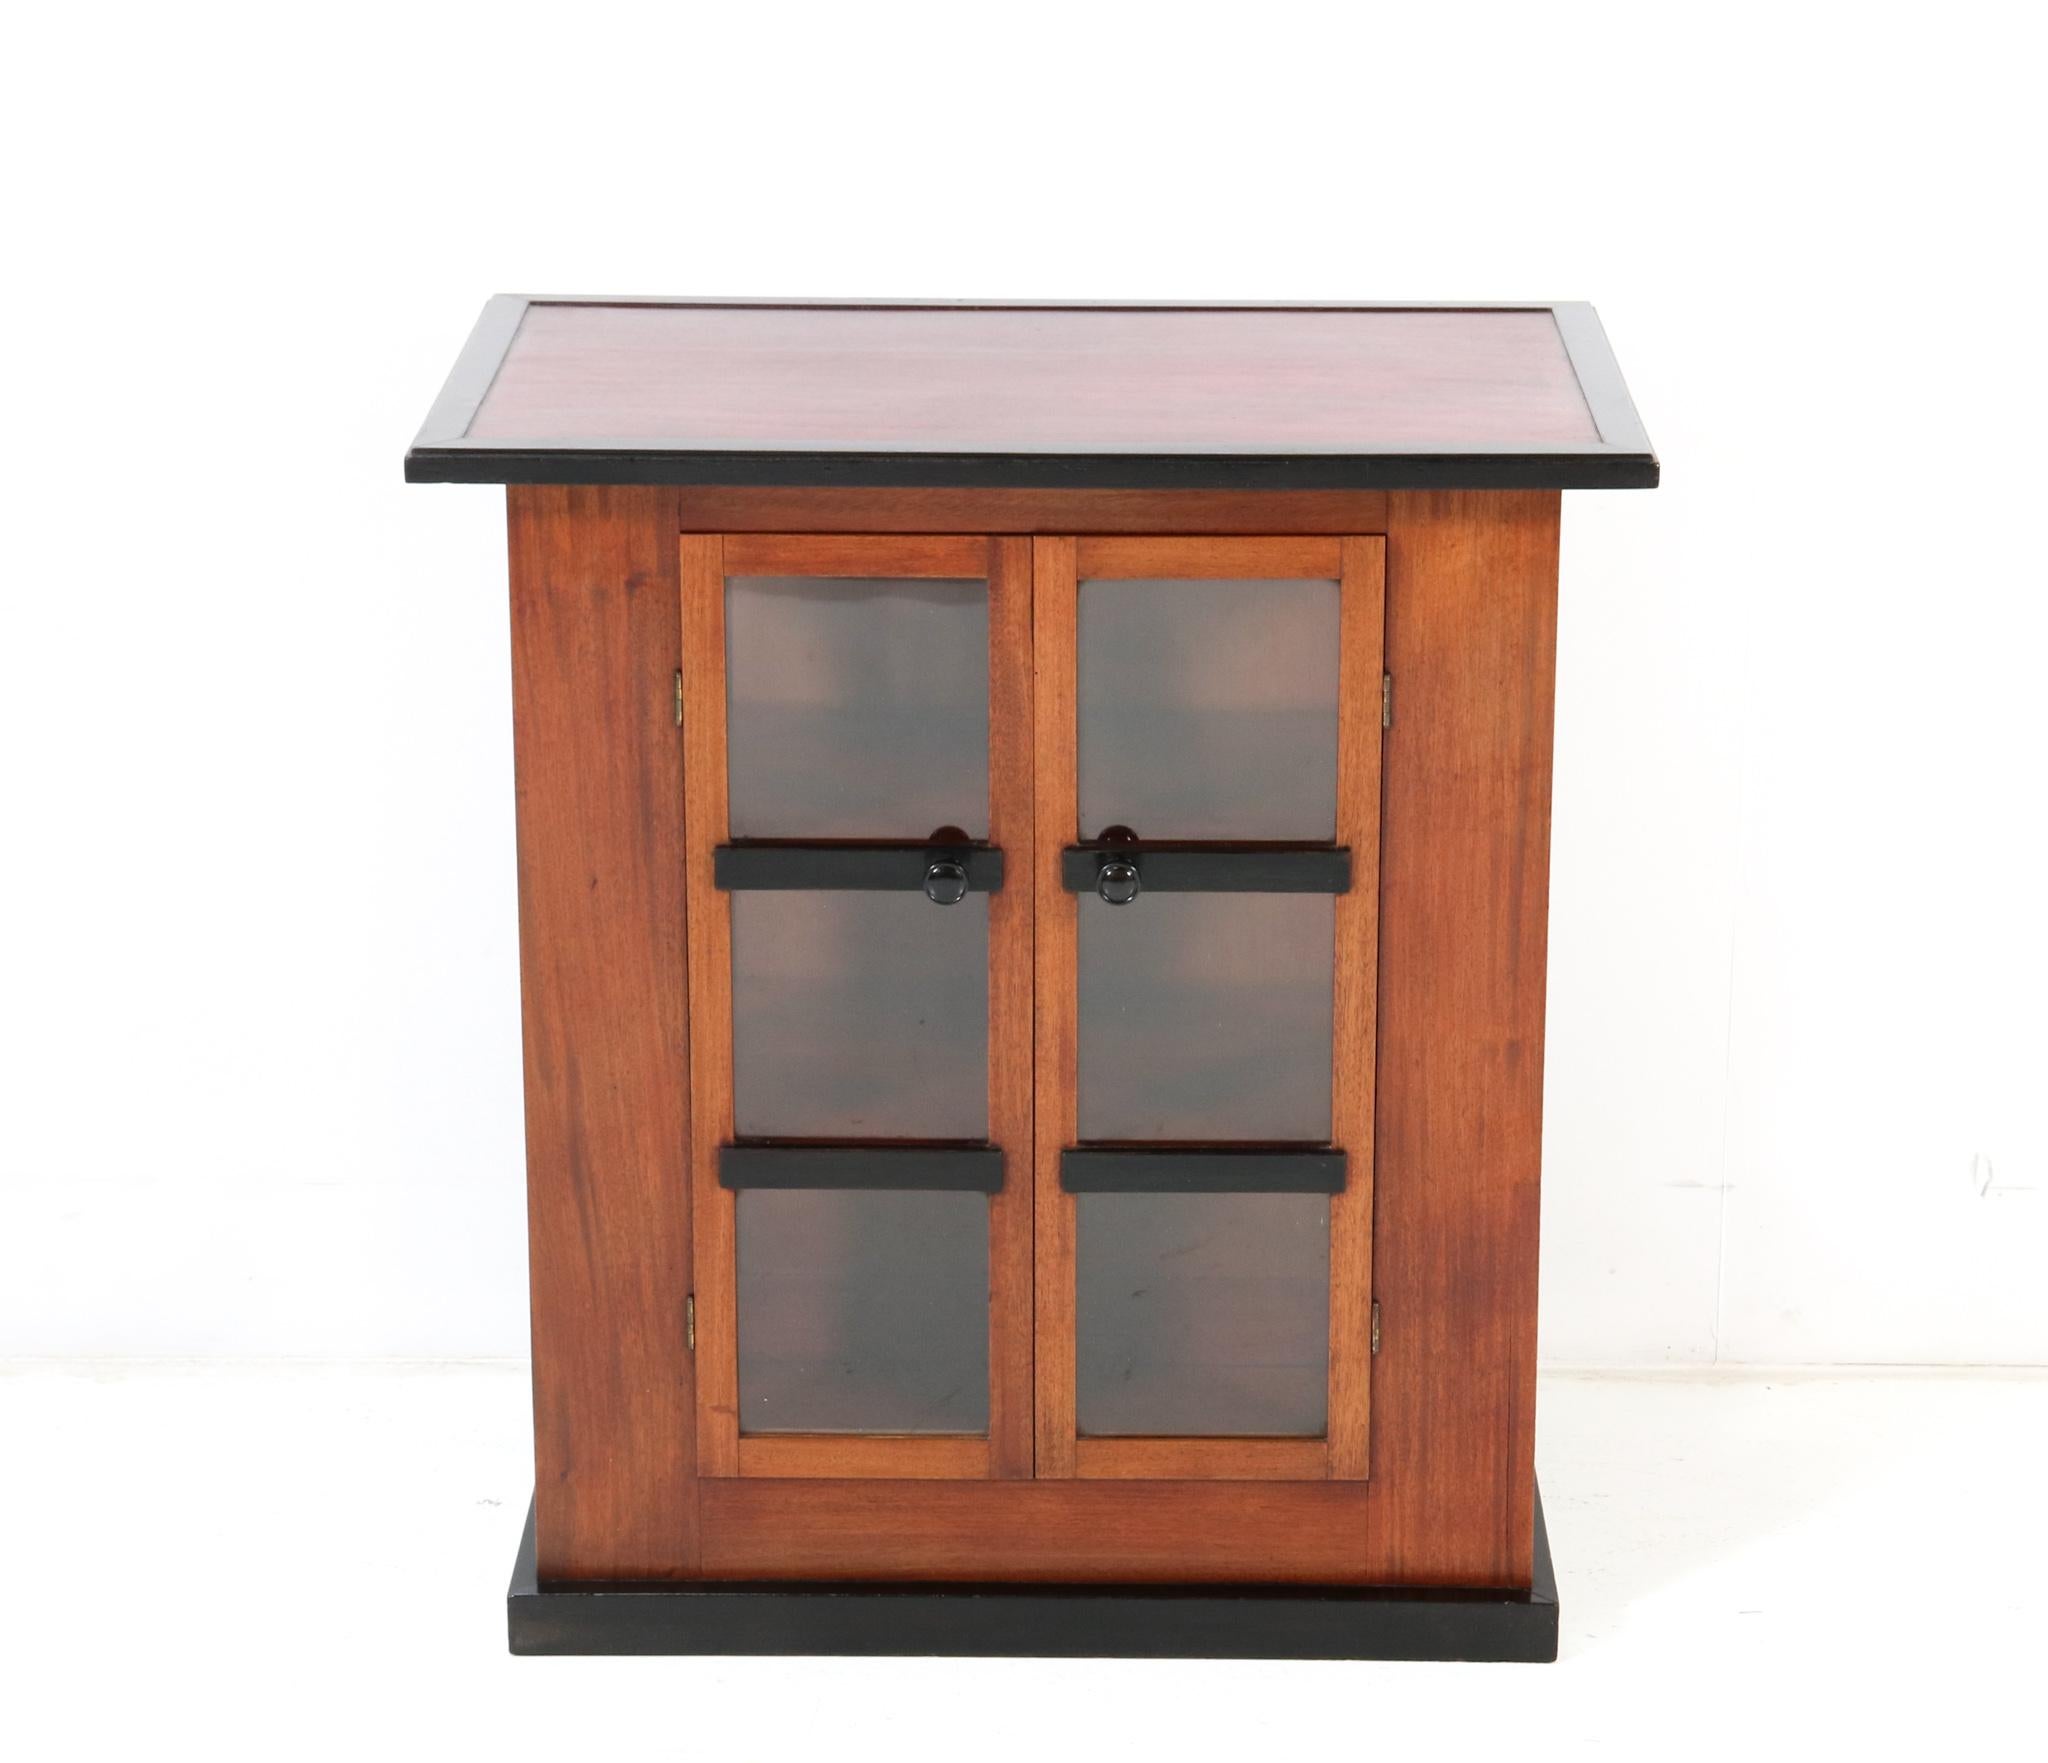 Magnificent and rare Art Deco Modernist tea cabinet or serving cabinet.
Design by Jan Brunott.
Striking Dutch design from the 1920s.
Solid walnut and original black lacquered knobs on the two doors.
Original black lacquered elements and original